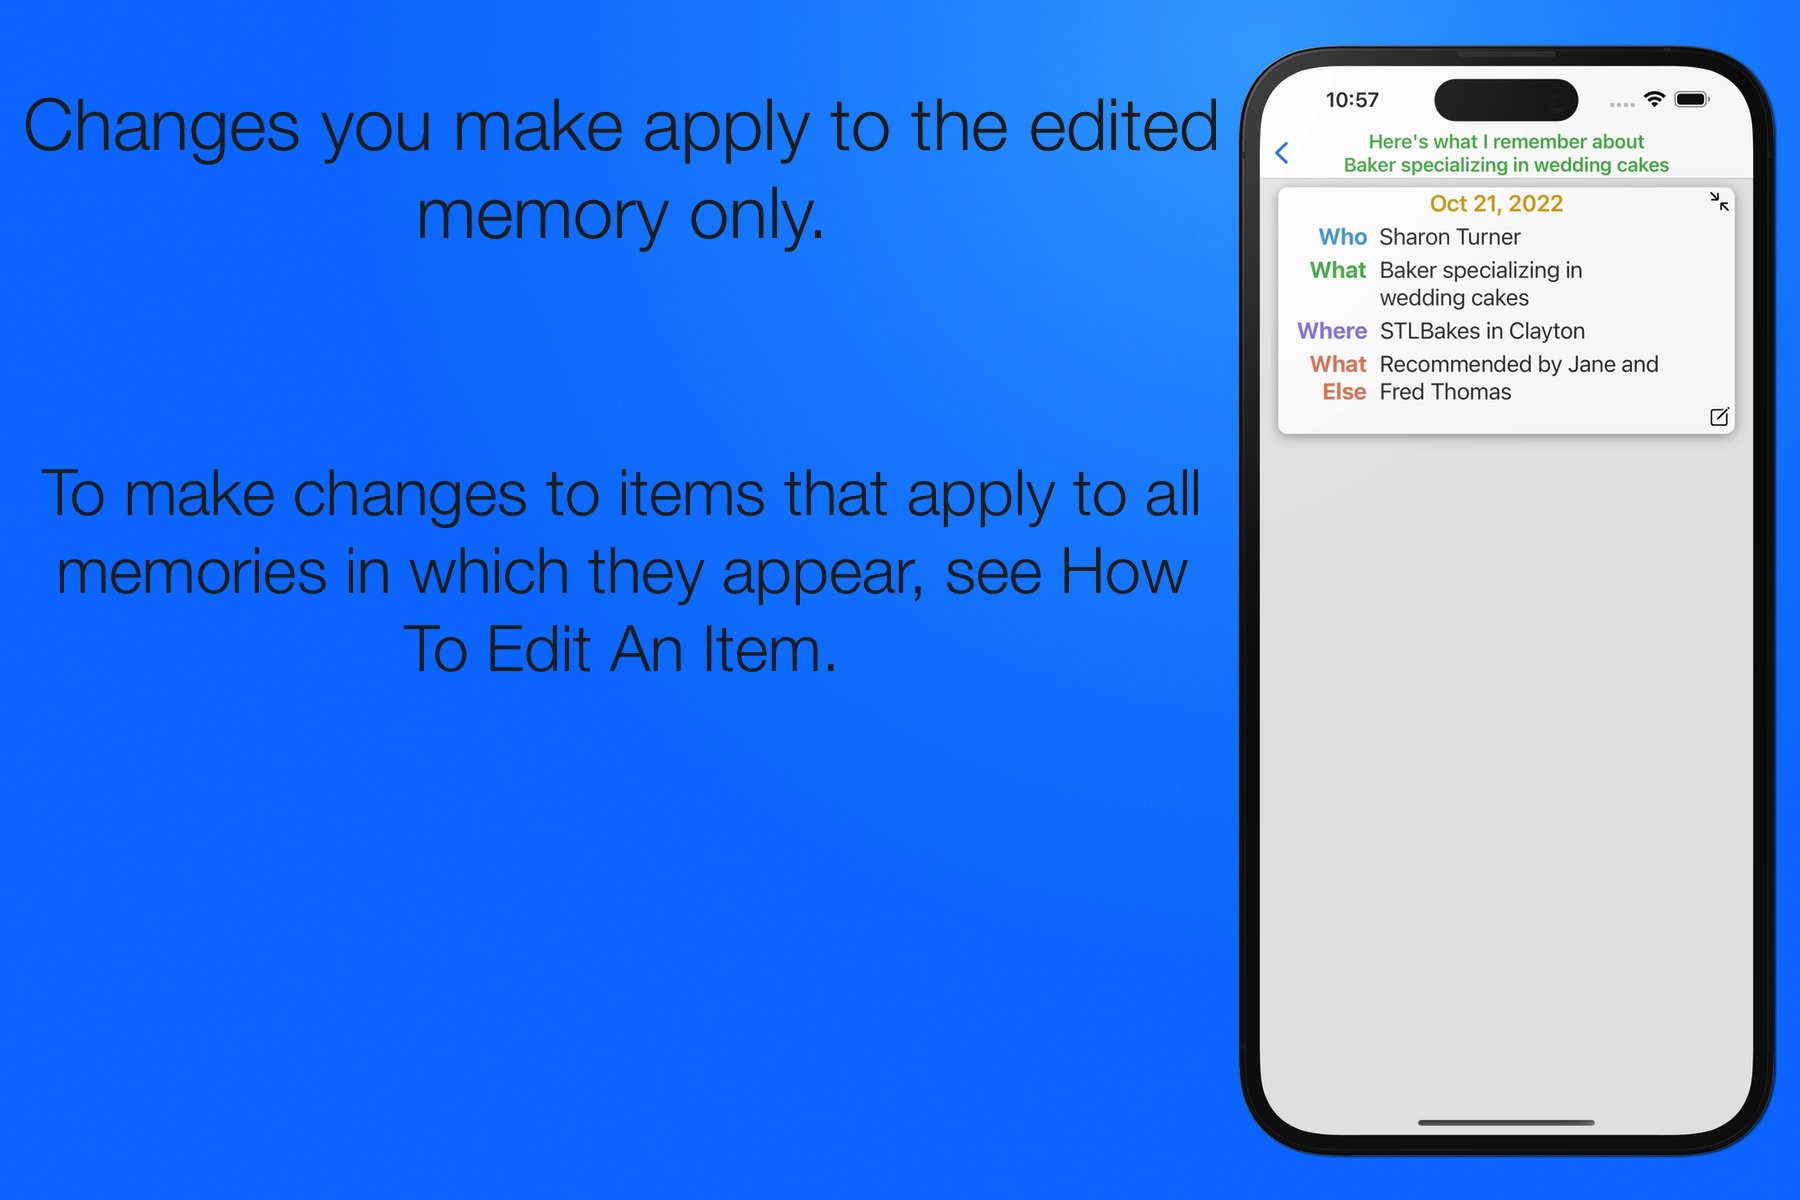 Changes only apply to the edited memory.